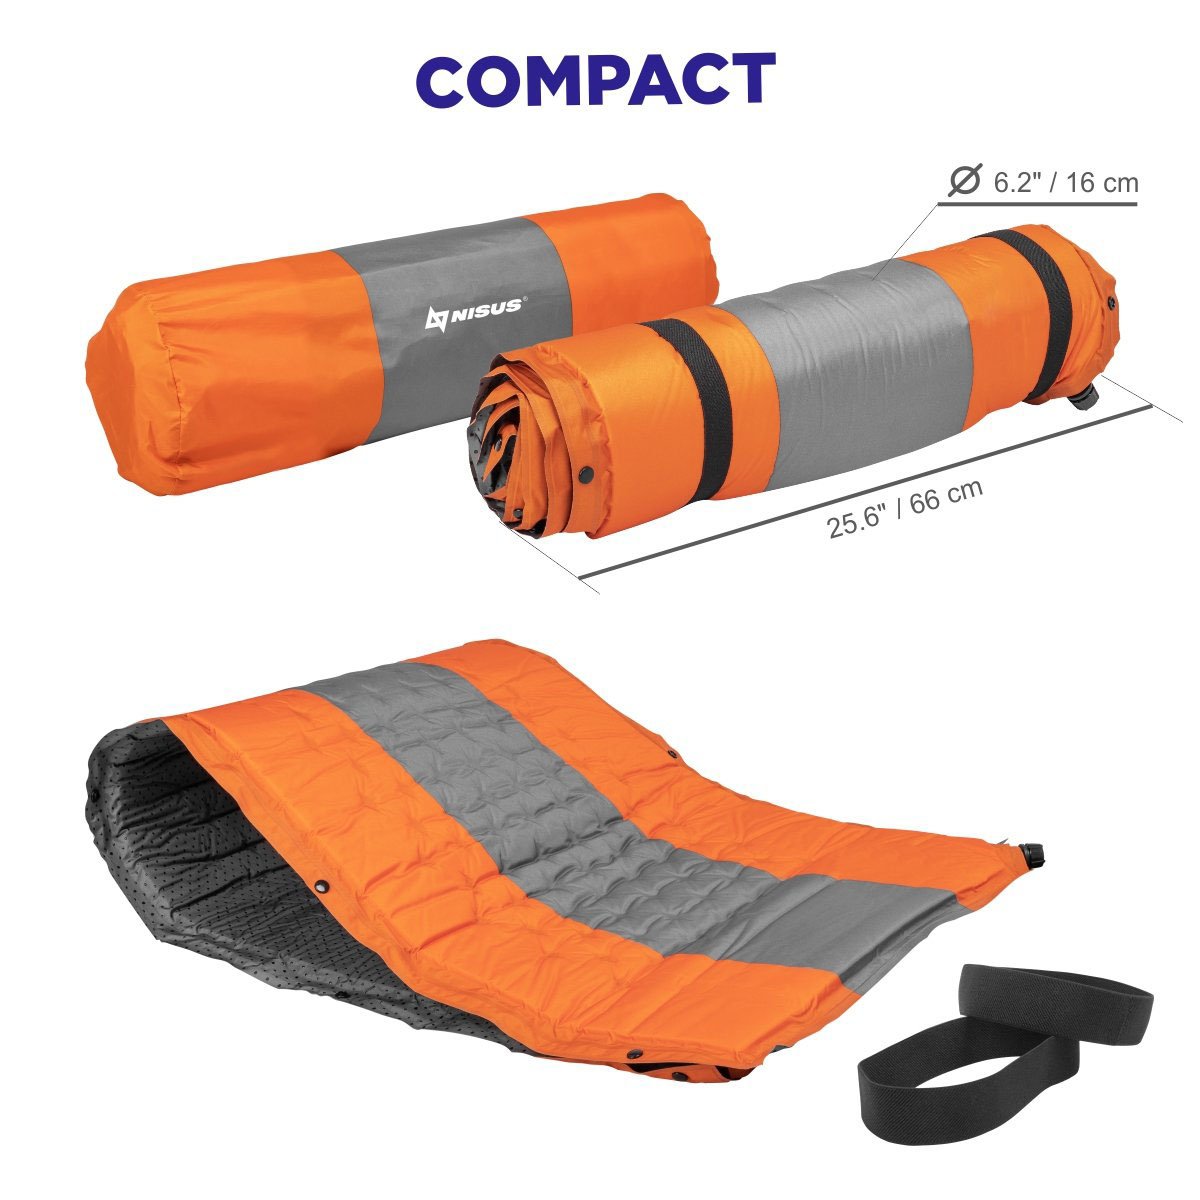 Easy Roll Up and Compact Orange Self Inflating Sleeping Pad for Camping